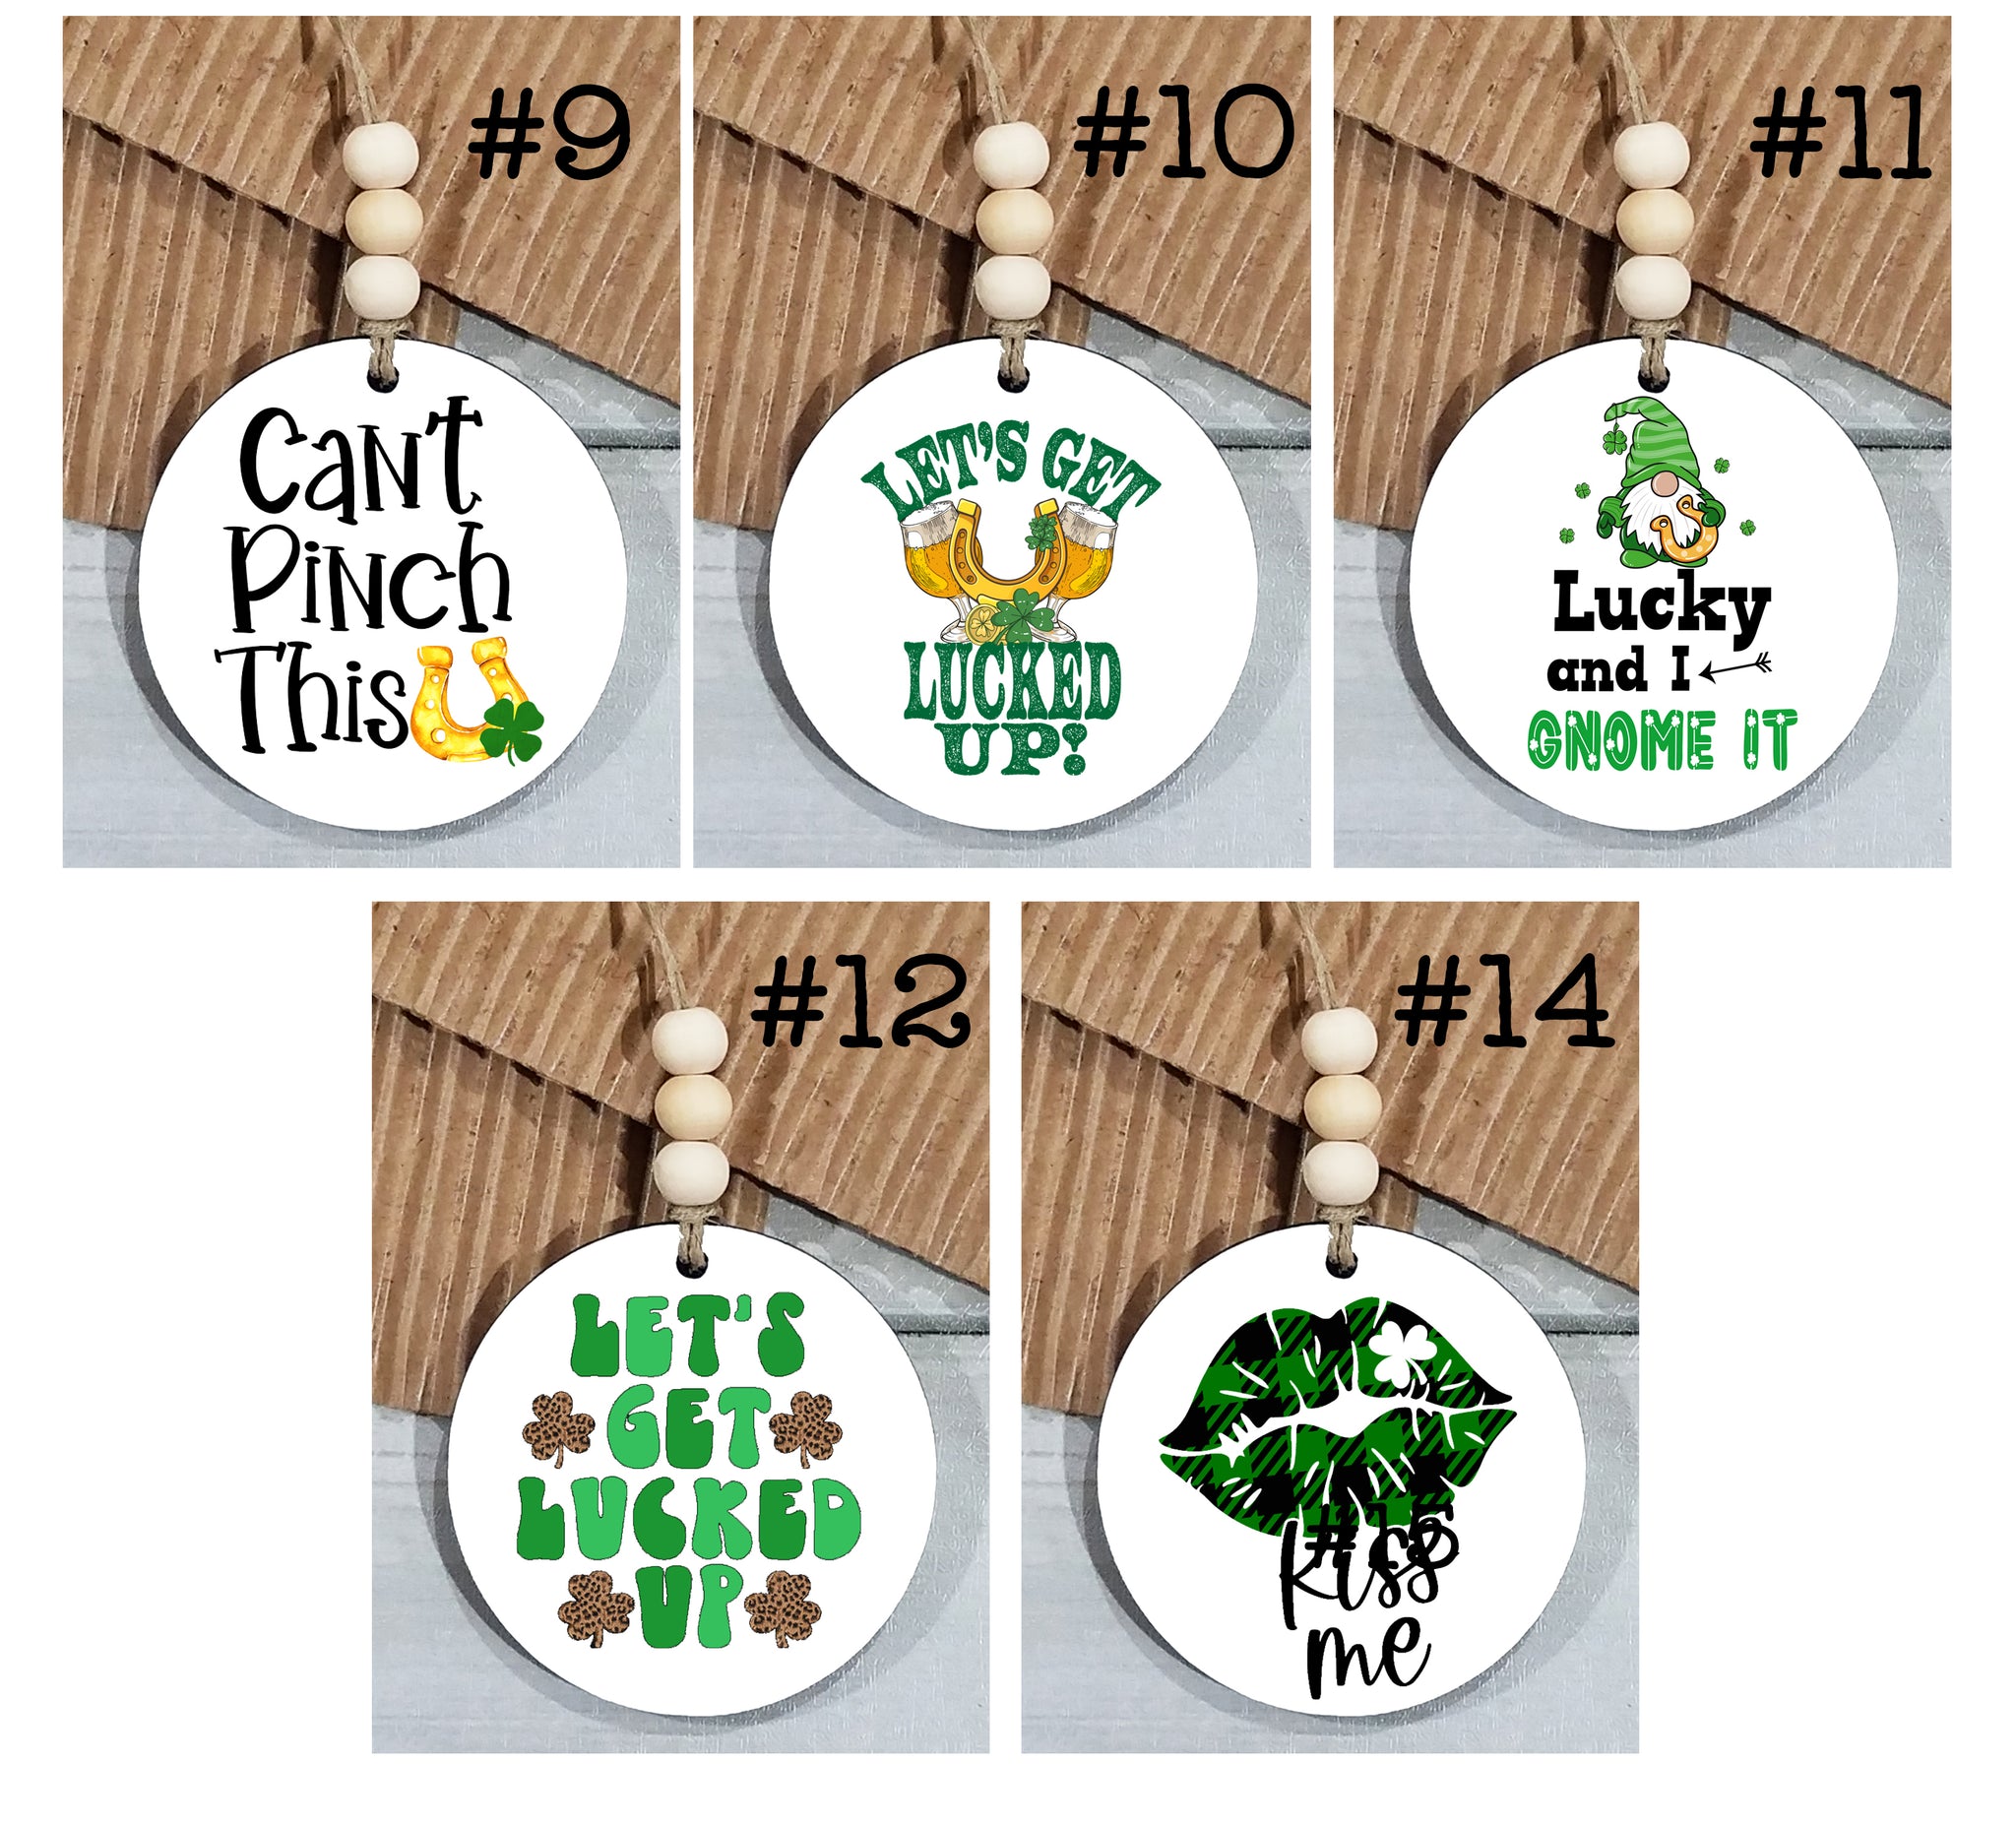 35 DIY Jewelry Projects for St. Patrick's Day | AllFreeJewelryMaking.com